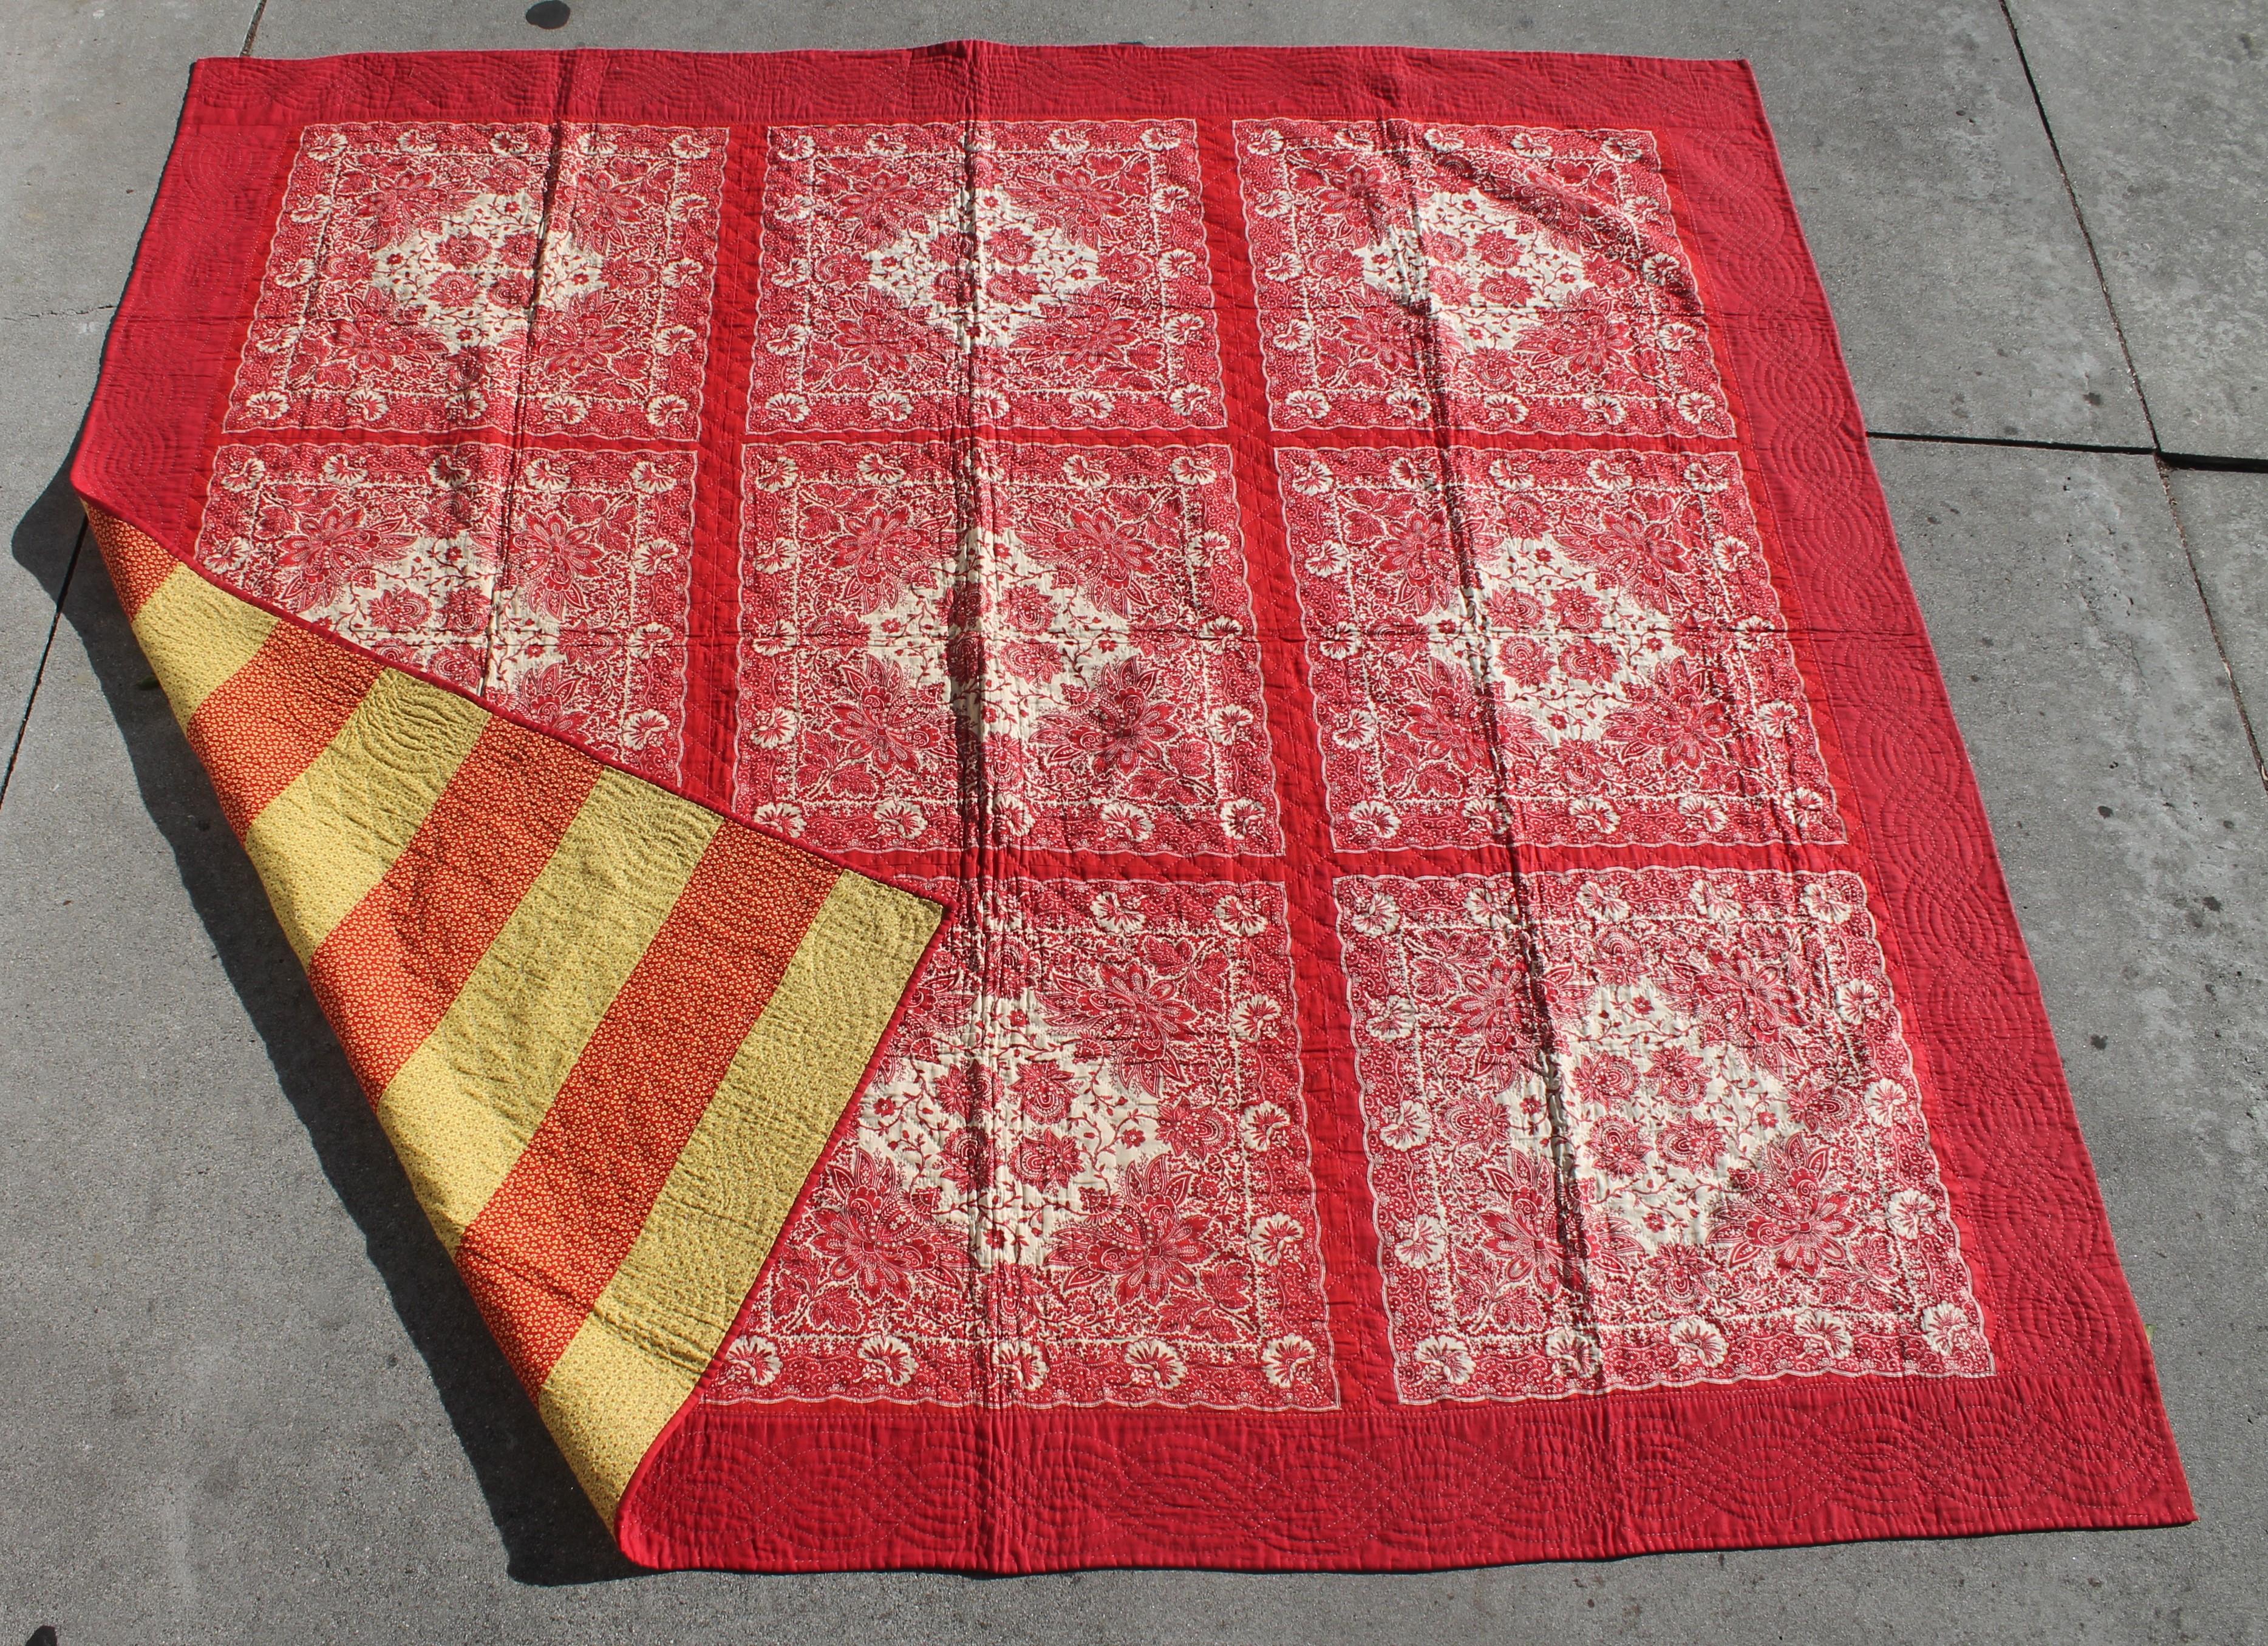 This super rare bandana quilt is in pristine condition with a bars pattern backing. The quilting is fantastic and the quilt was found in Berkshire County, Pennsylvania. This is a real collectors.